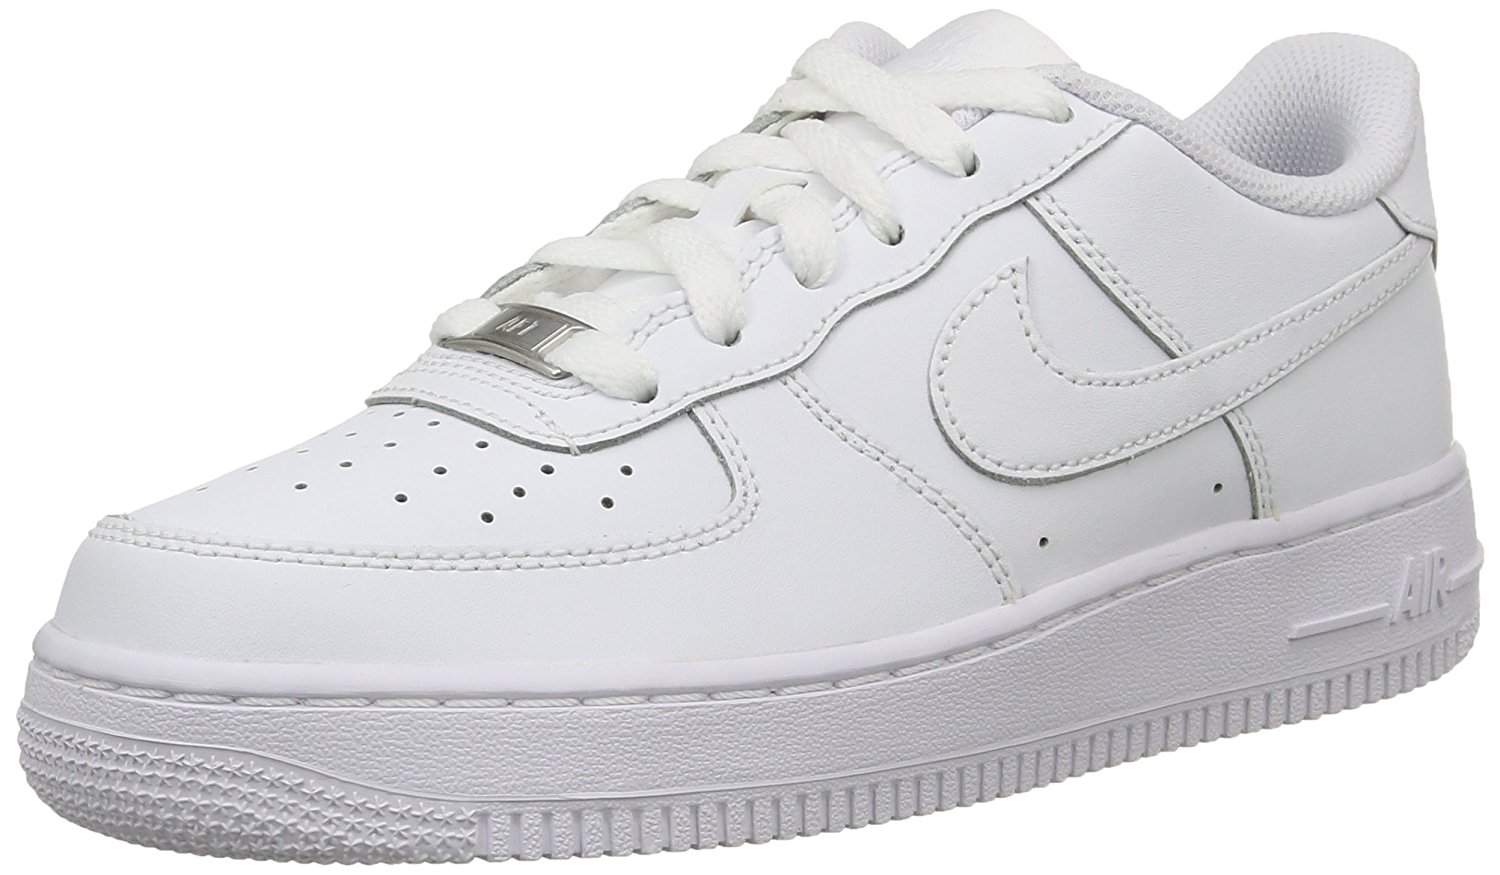 Size Down Air Force 1 - Airforce Military